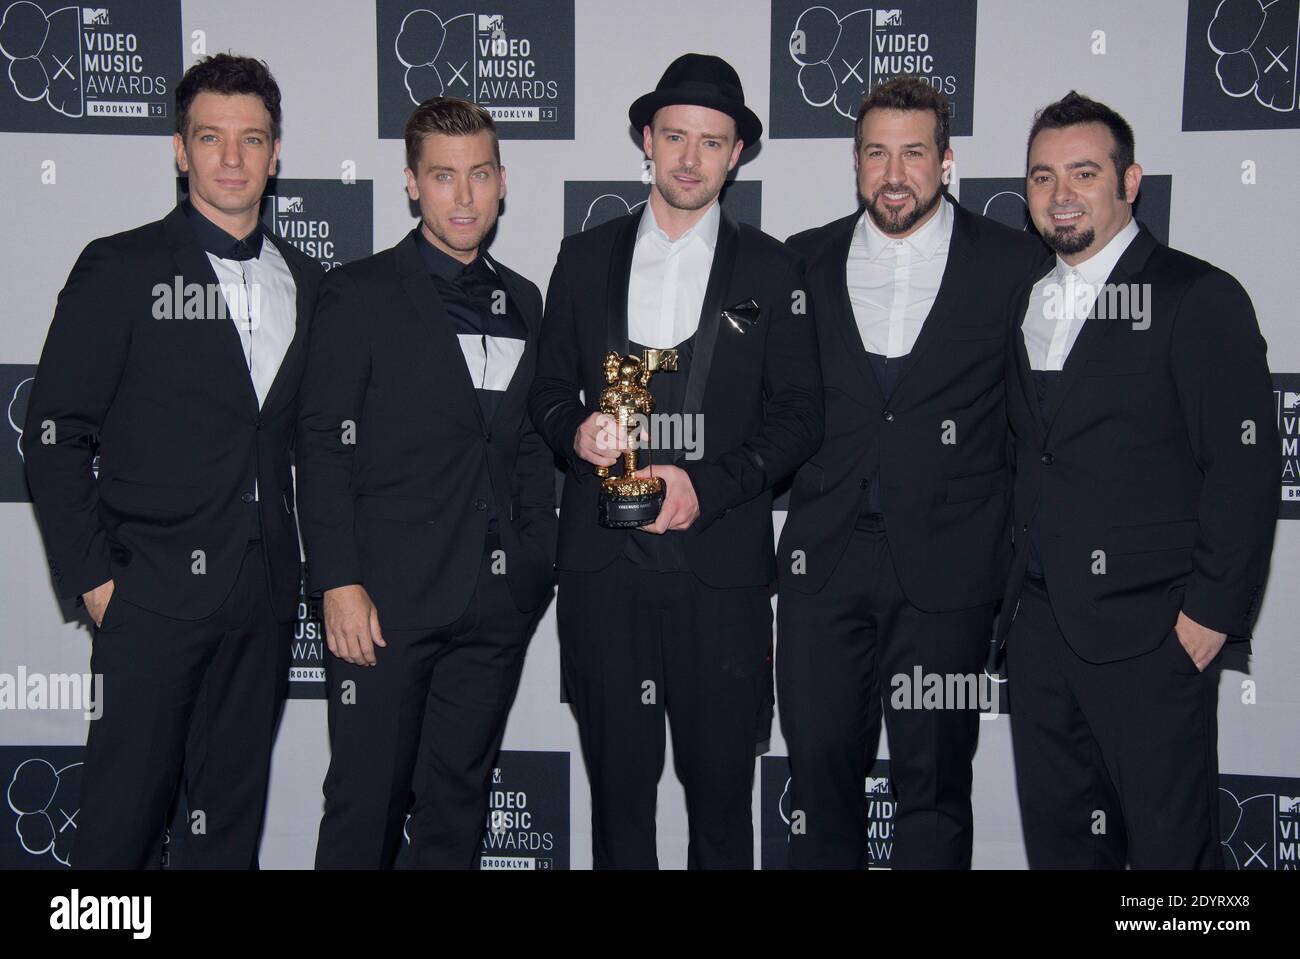 JC Chasez, Lance Bass, Justin Timberlake, Joey Fatone and Chris Kirkpatrick of N'Sync pose in the press room of the 2013 MTV Video Music Awards held at the Barclays Center i Brooklyn, New York City, NY, USA on August 25, 2013. Photo by Lionel Hahn/ABACAPRESS.COM Stock Photo